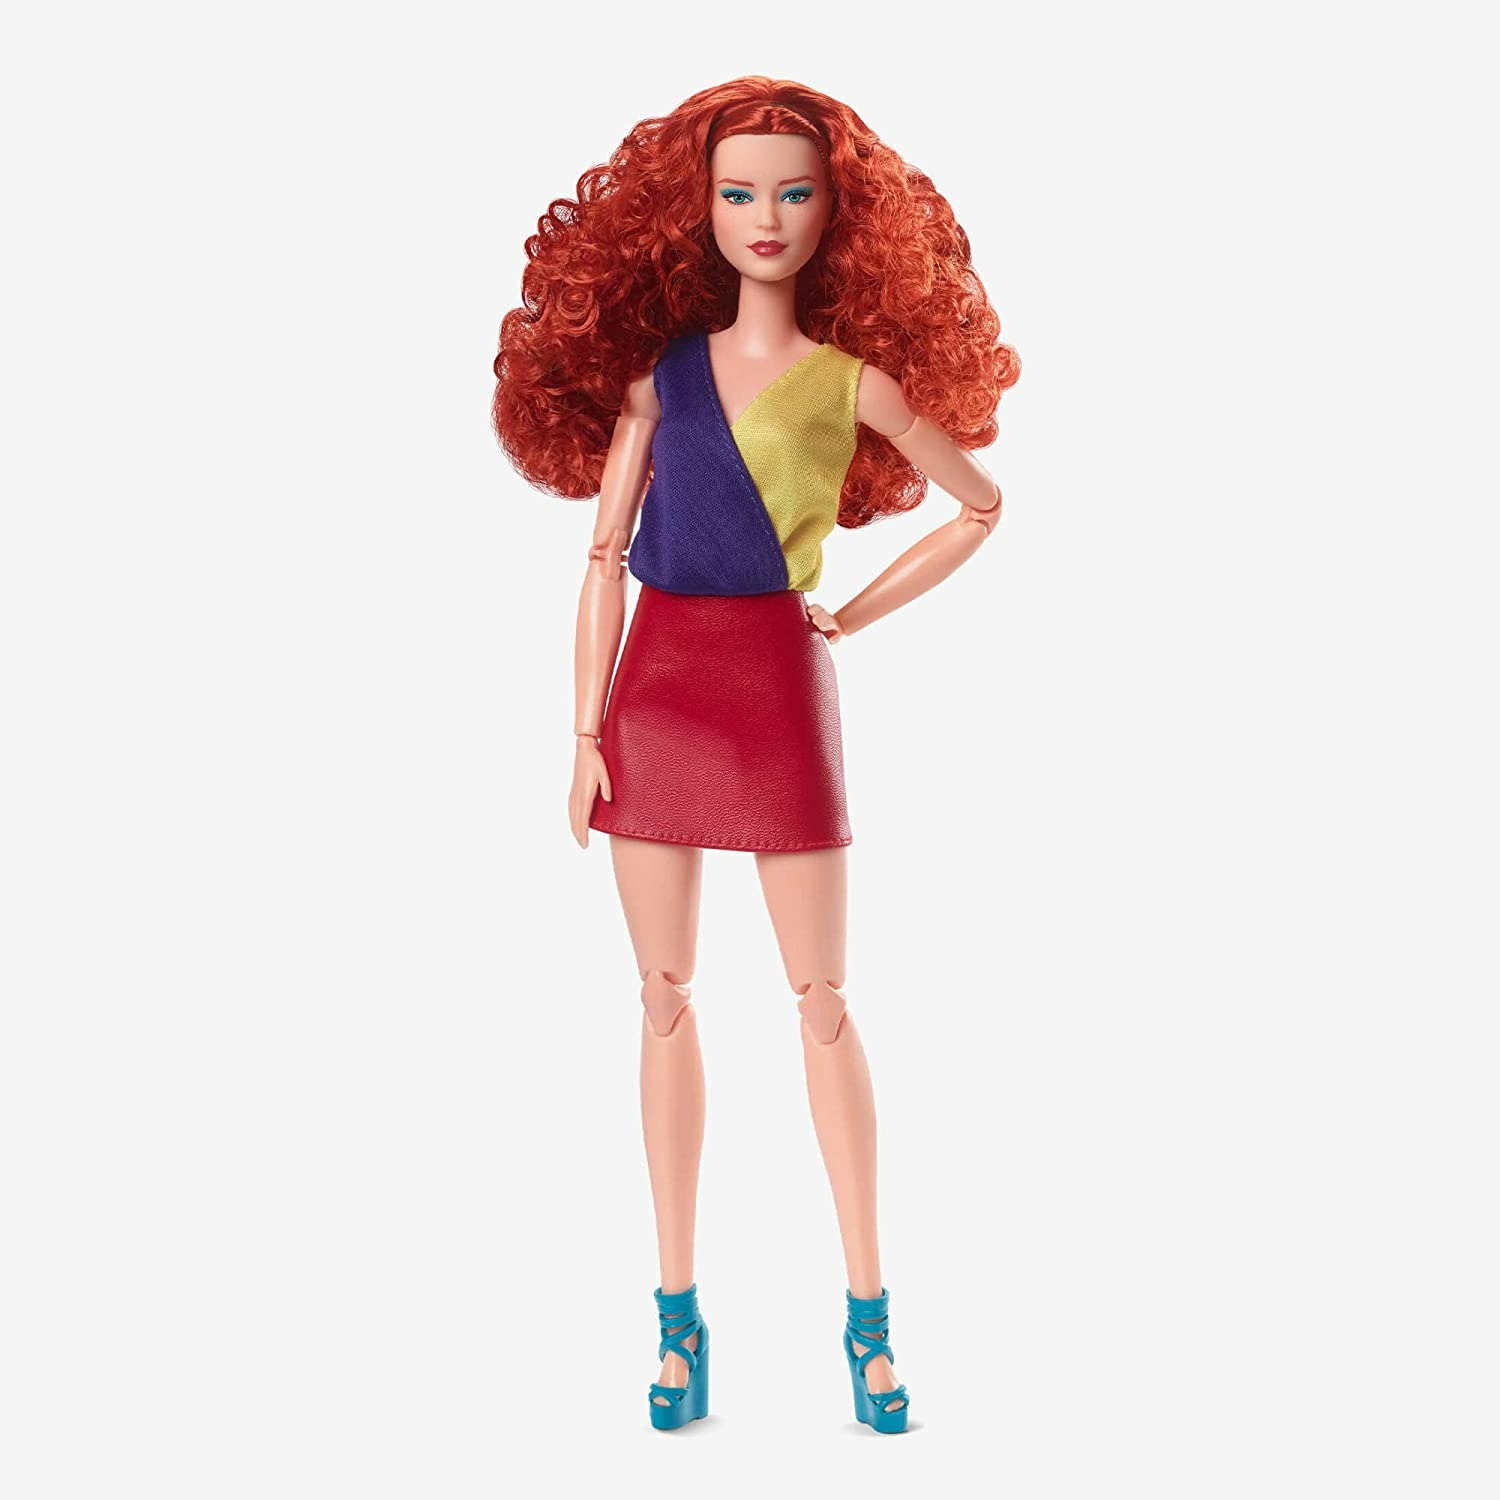 Barbie Looks Doll with Curly Red Hair